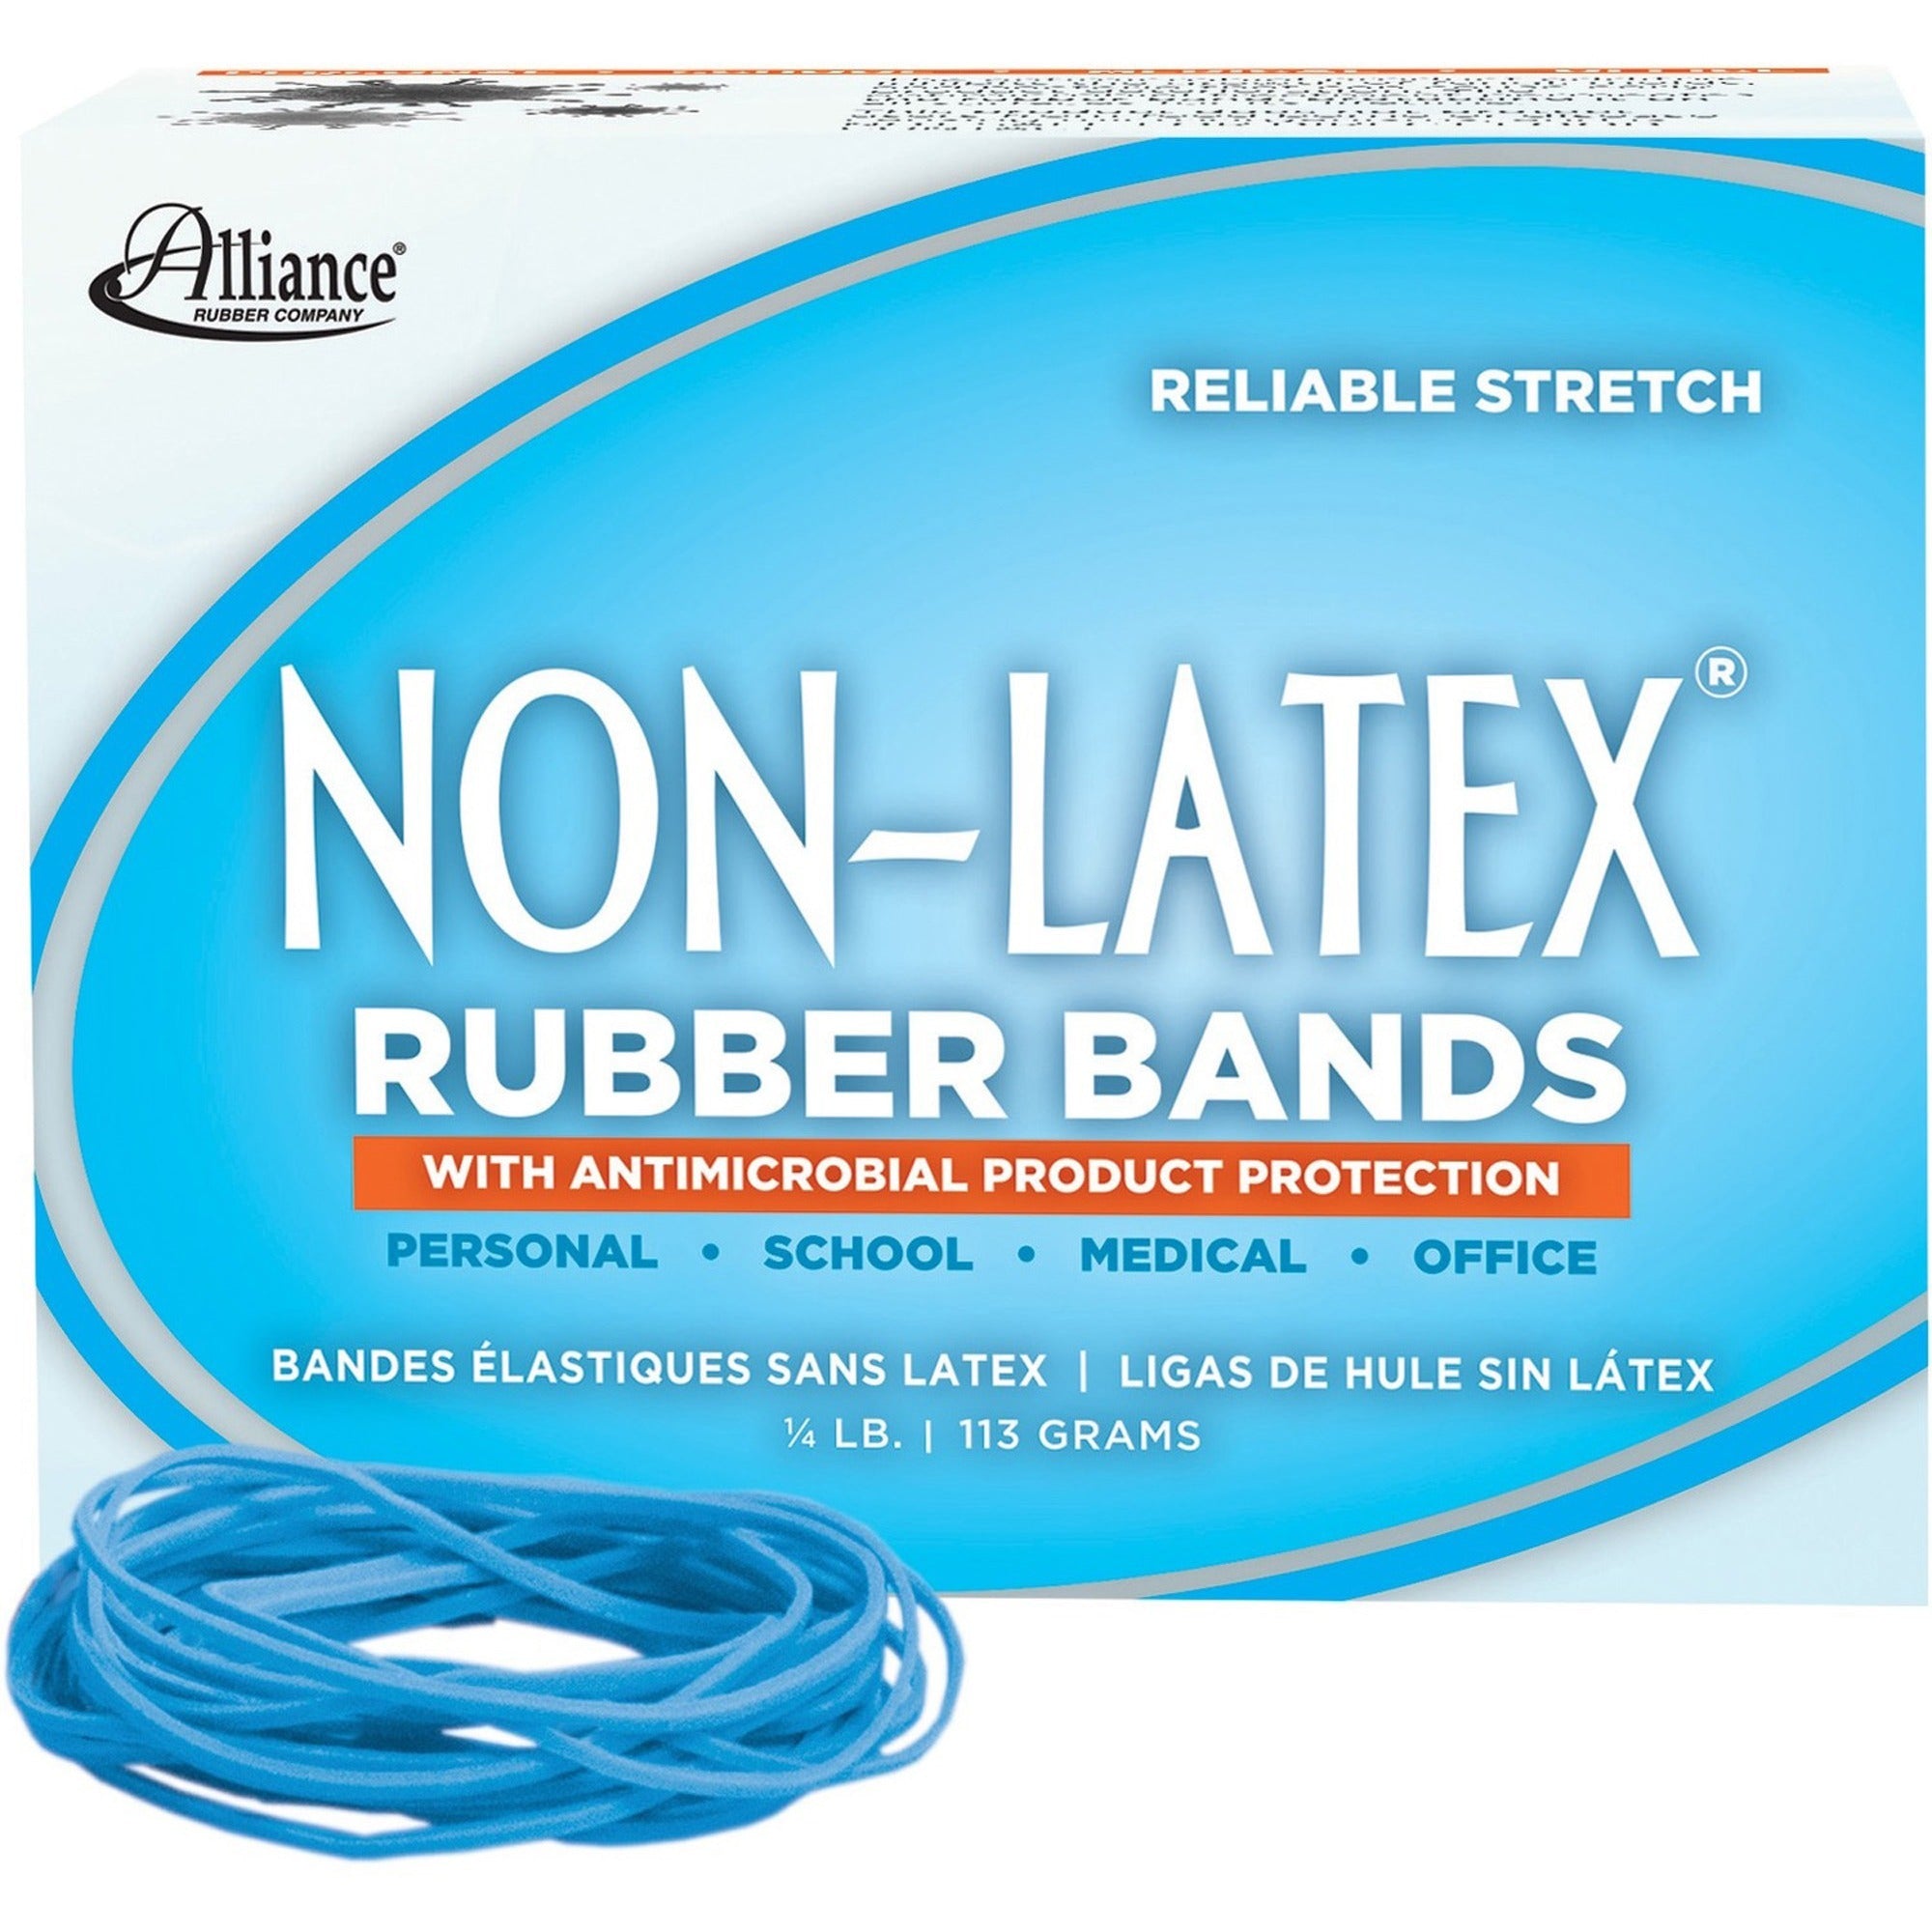 Alliance Rubber 42199 Non-Latex Rubber Bands with Antimicrobial Protection - Size #19 - 1/4 lb. box contains approx. 360 bands - 3 1/2" x 1/16" - Cyan blue - 